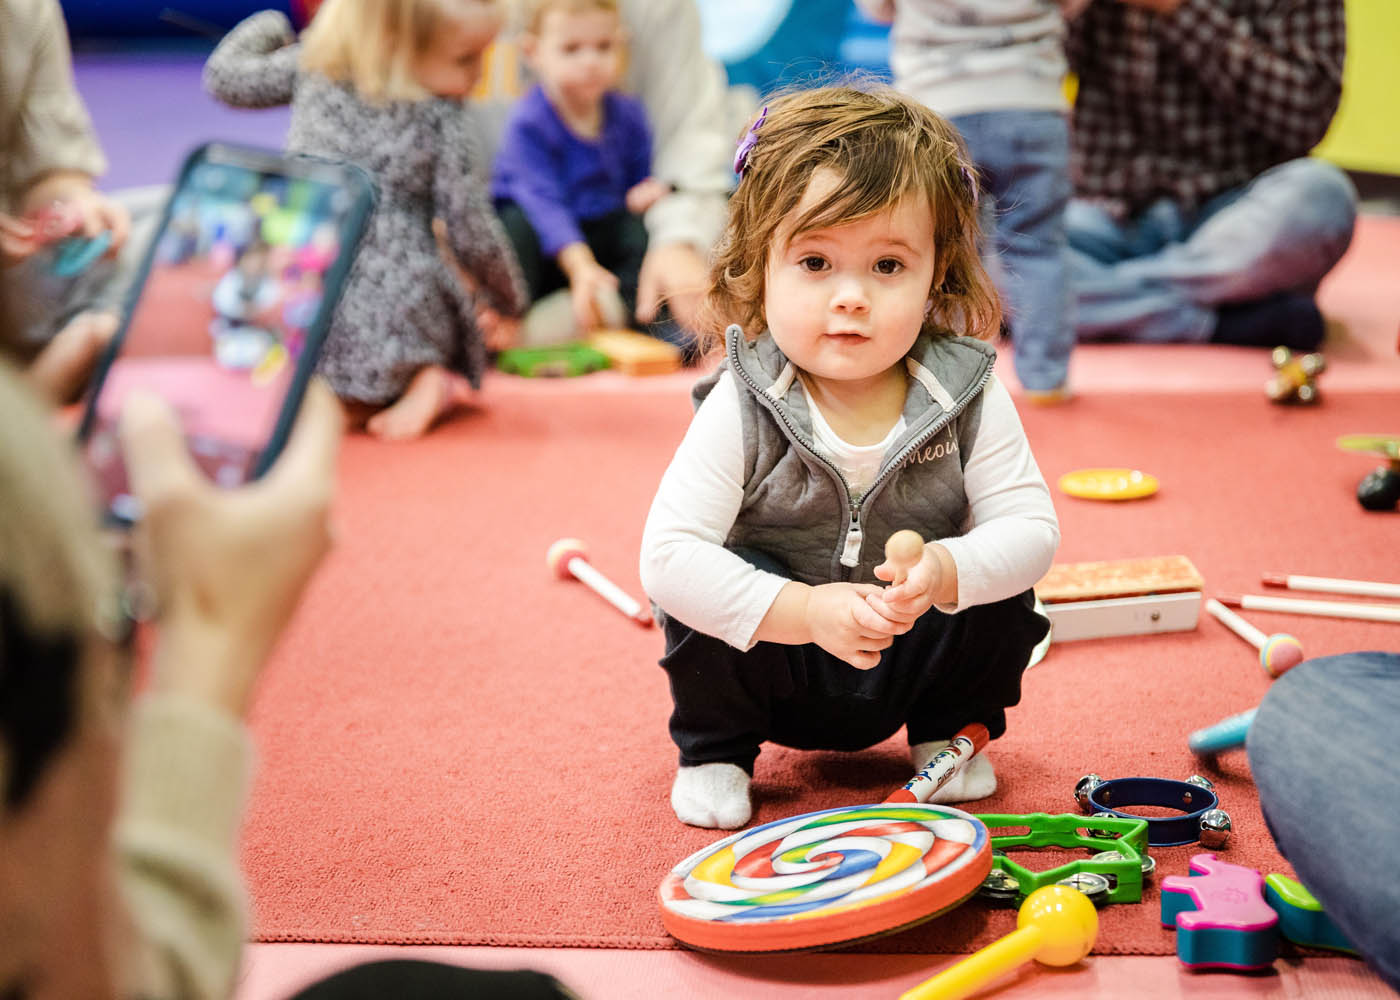 An adorable little girl sitting in front of musical instruments at a Romp n' Roll baby music class.